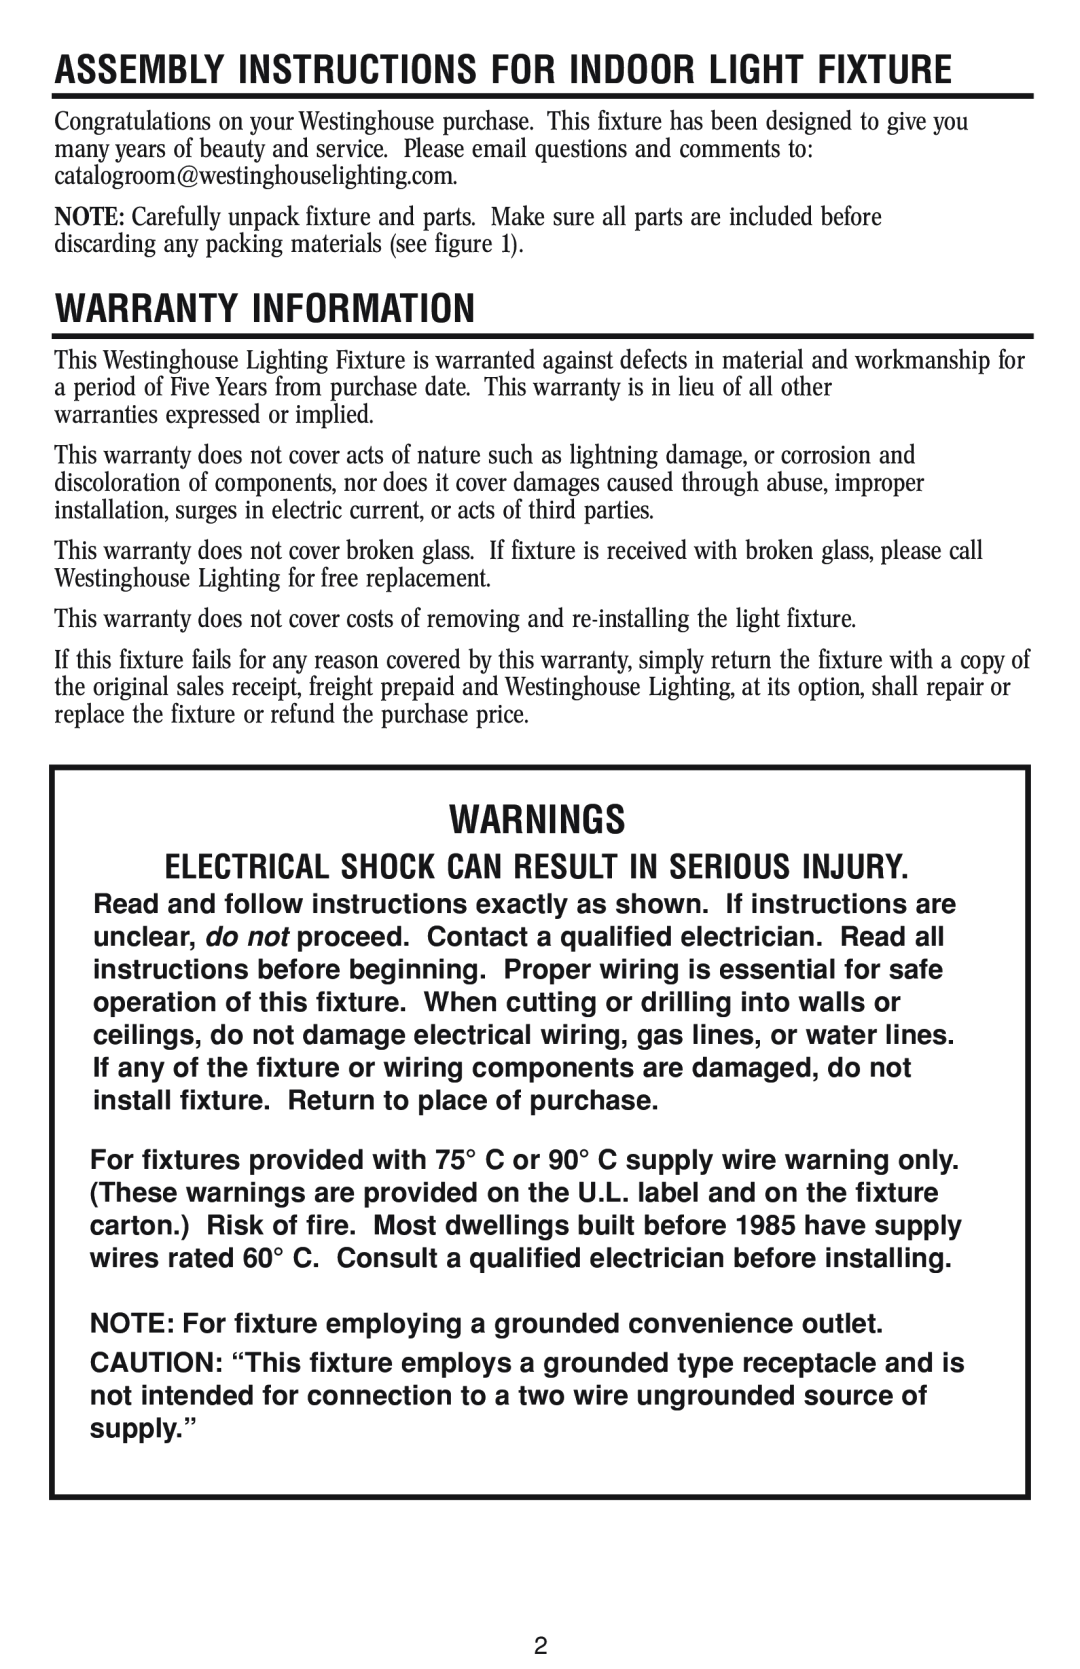 Westinghouse 1/14/04 owner manual Warranty Information, Warnings, Assembly Instructions For Indoor Light Fixture 